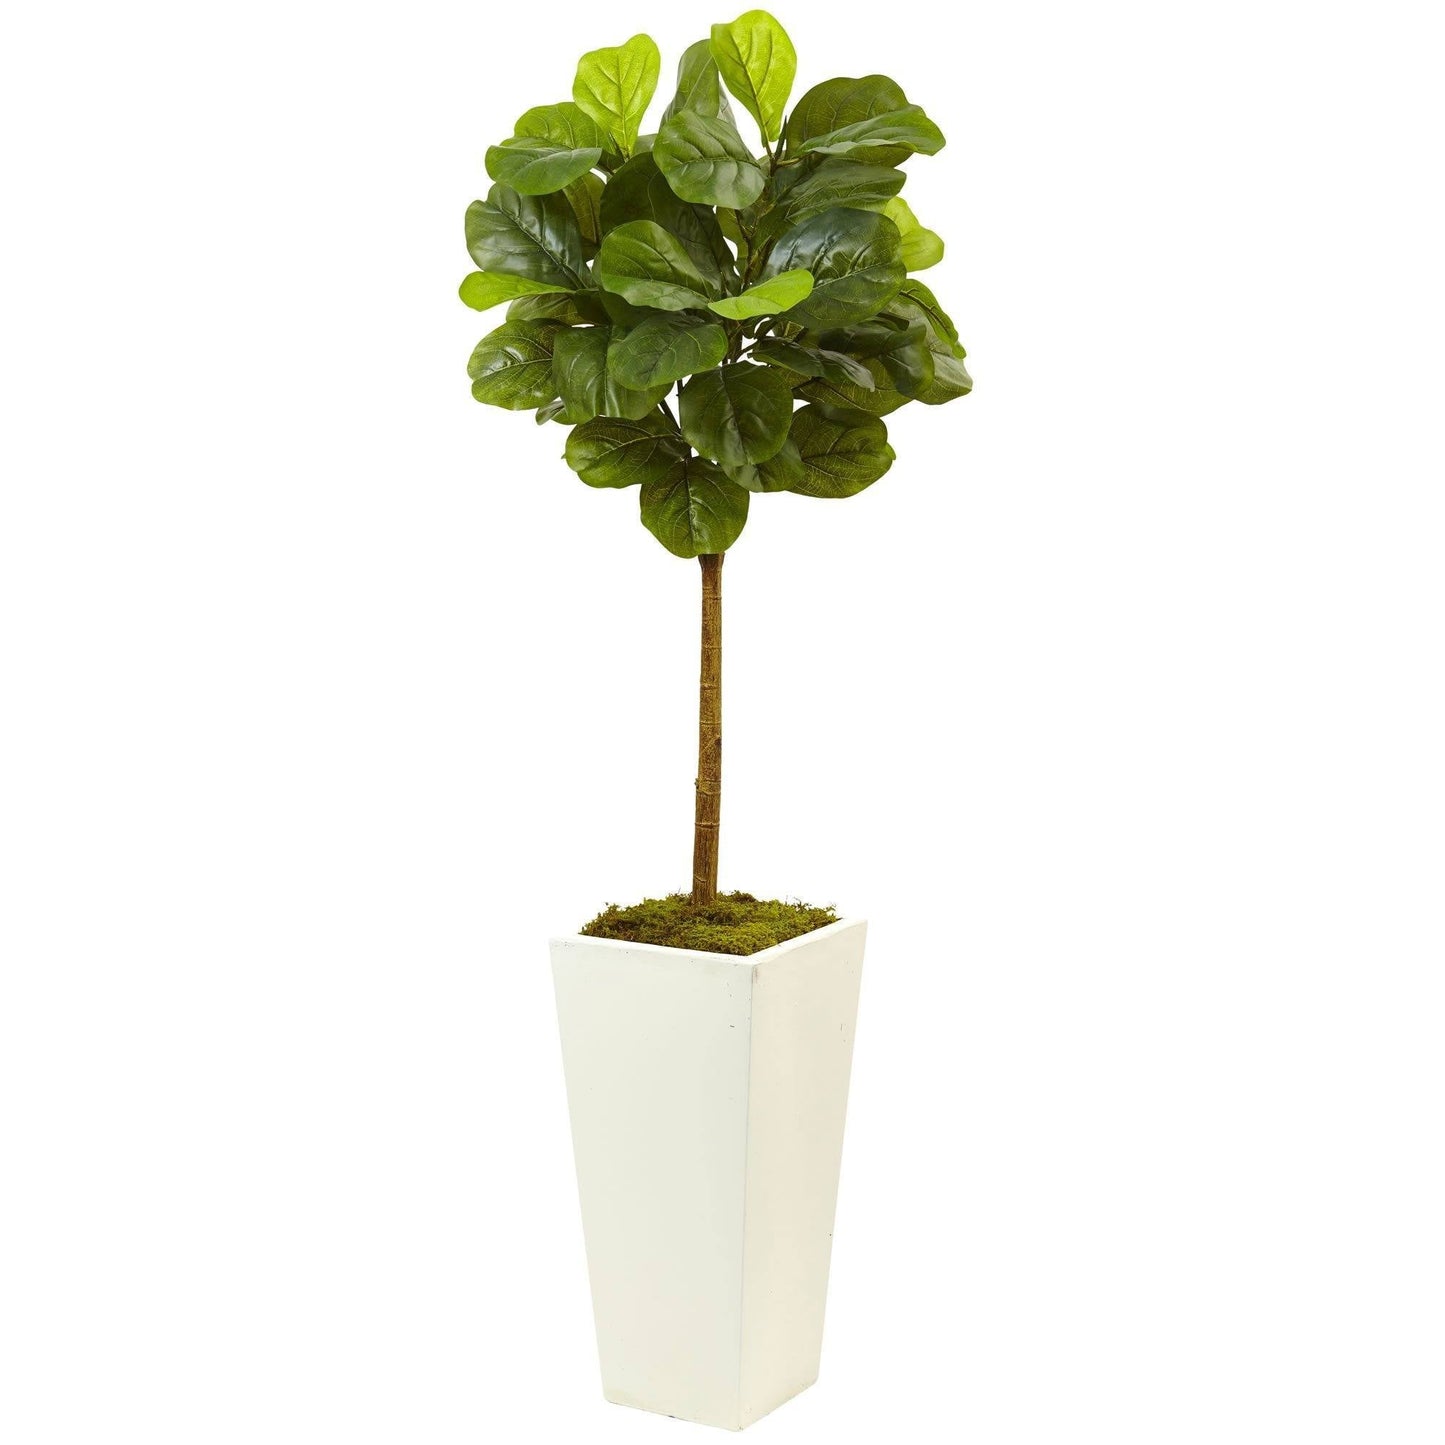 4.5’ Fiddle Leaf Fig in White Planter (Real Touch) by Nearly Natural